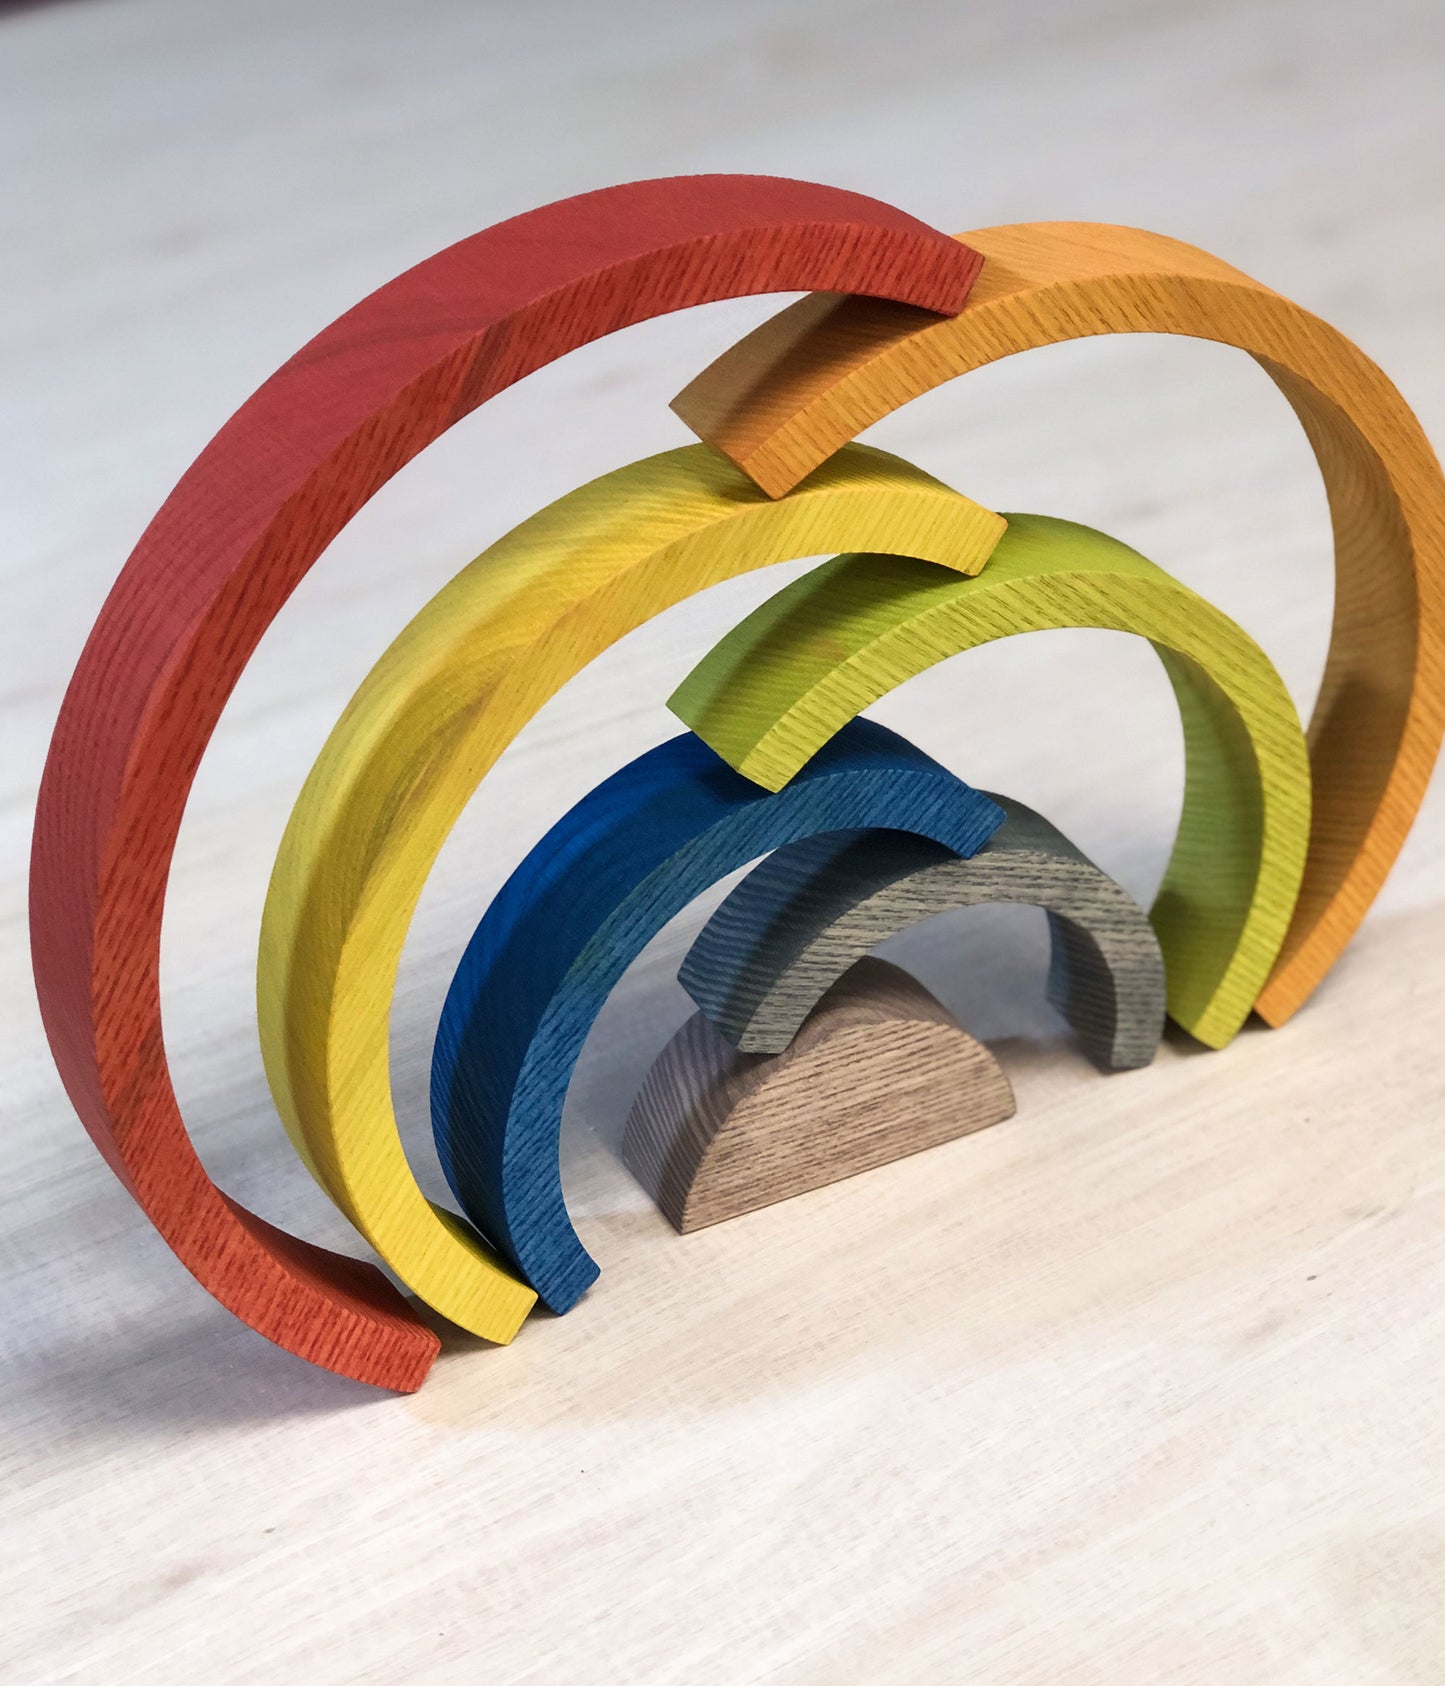 Make your own stacking wooden rainbow from solid Ash and Osmo oils